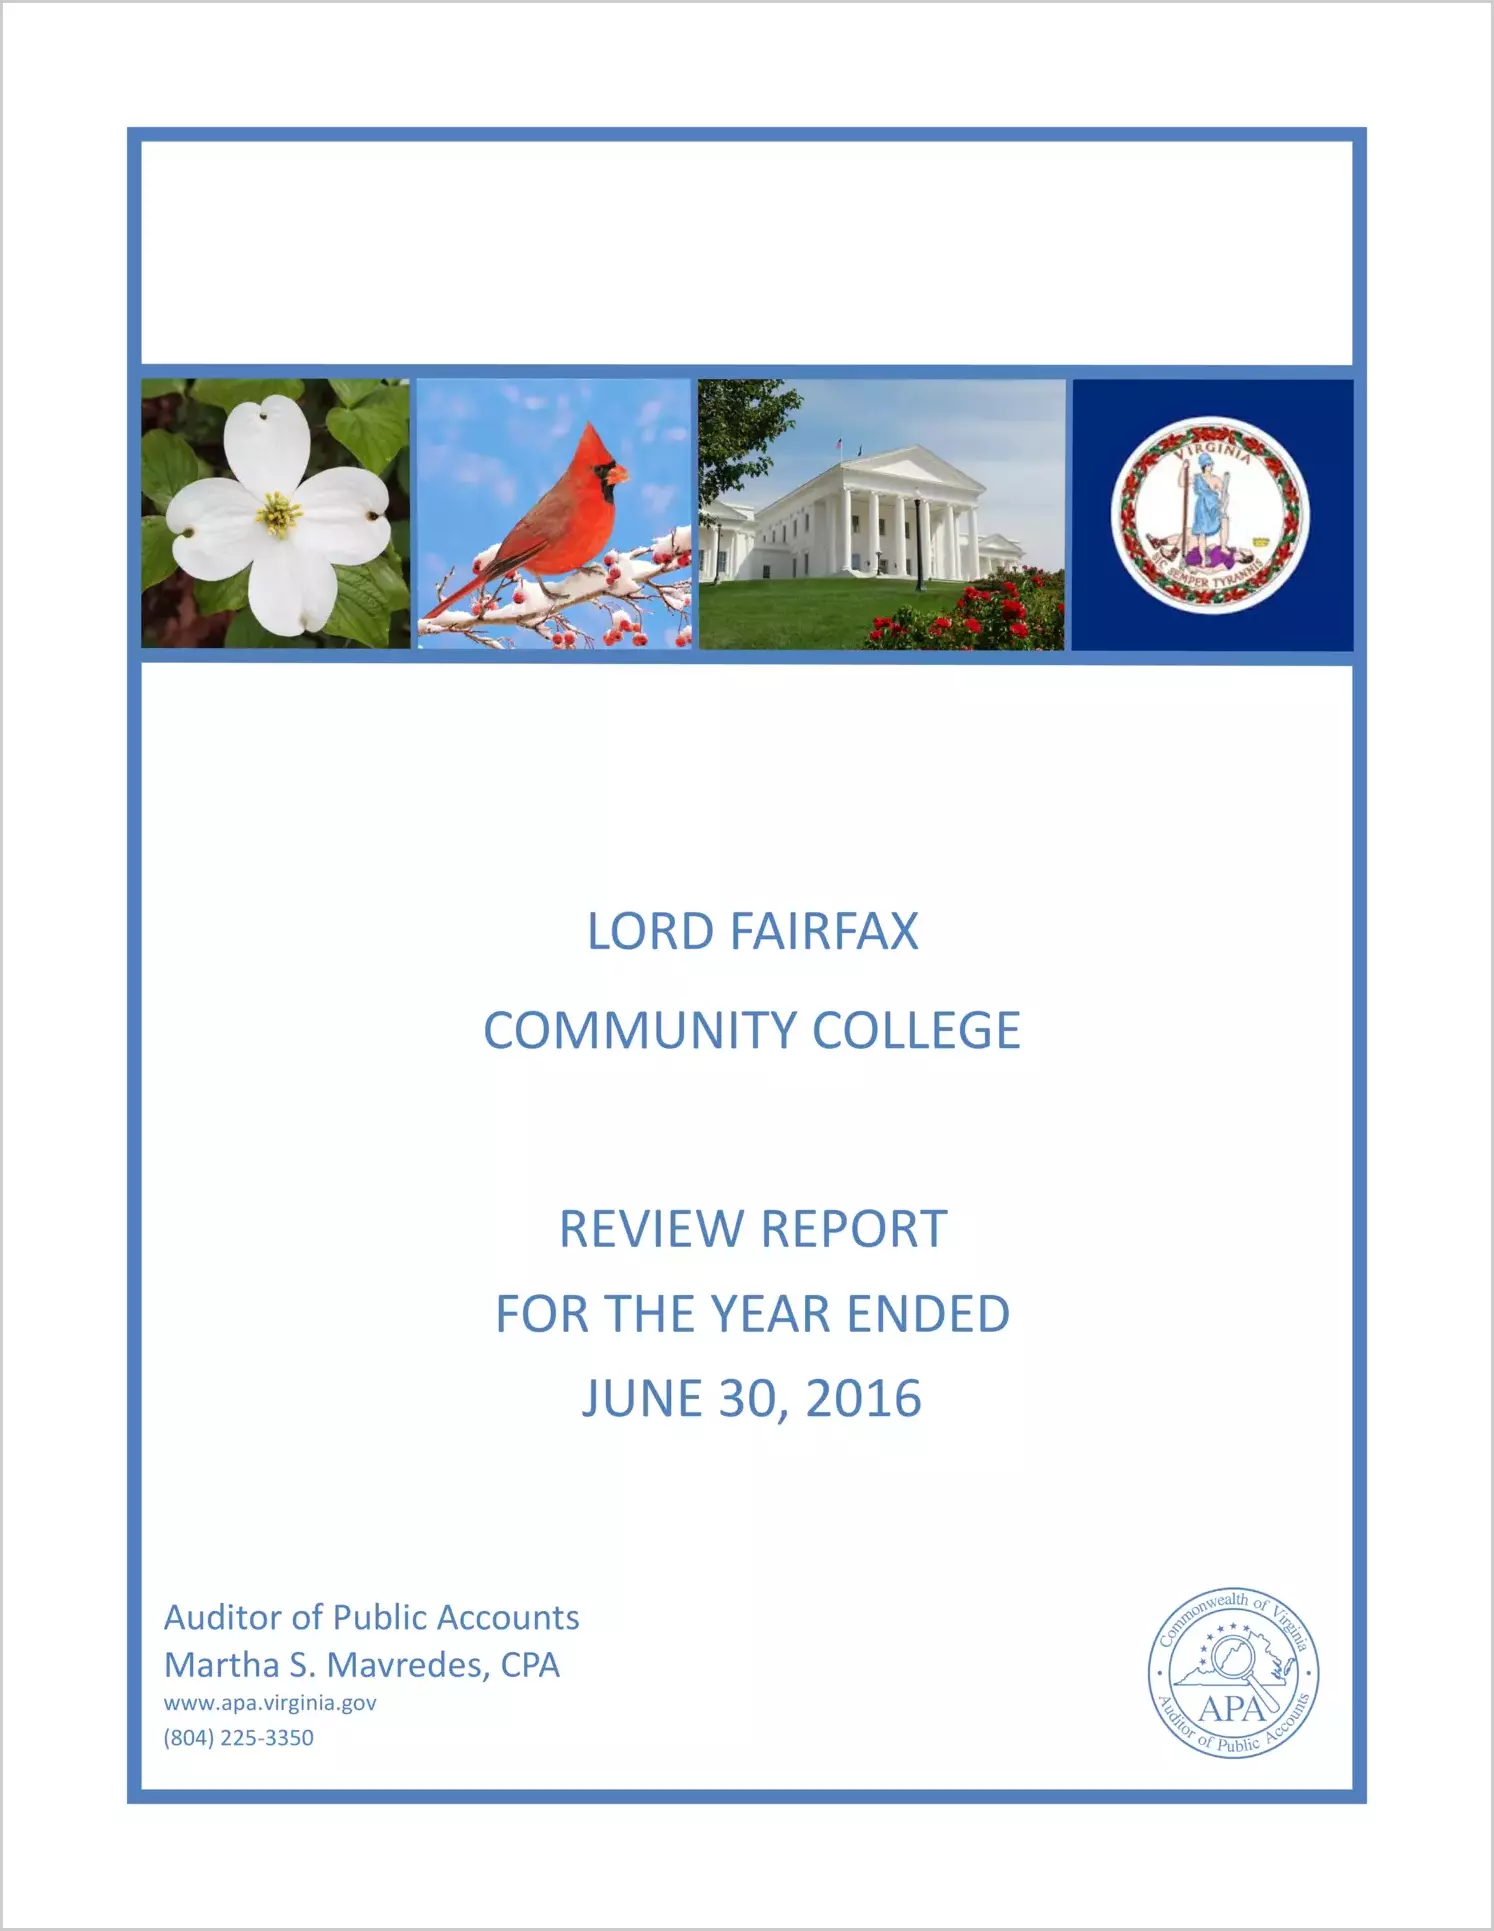 Lord Fairfax Community College Review Report for year ended June 30, 2016